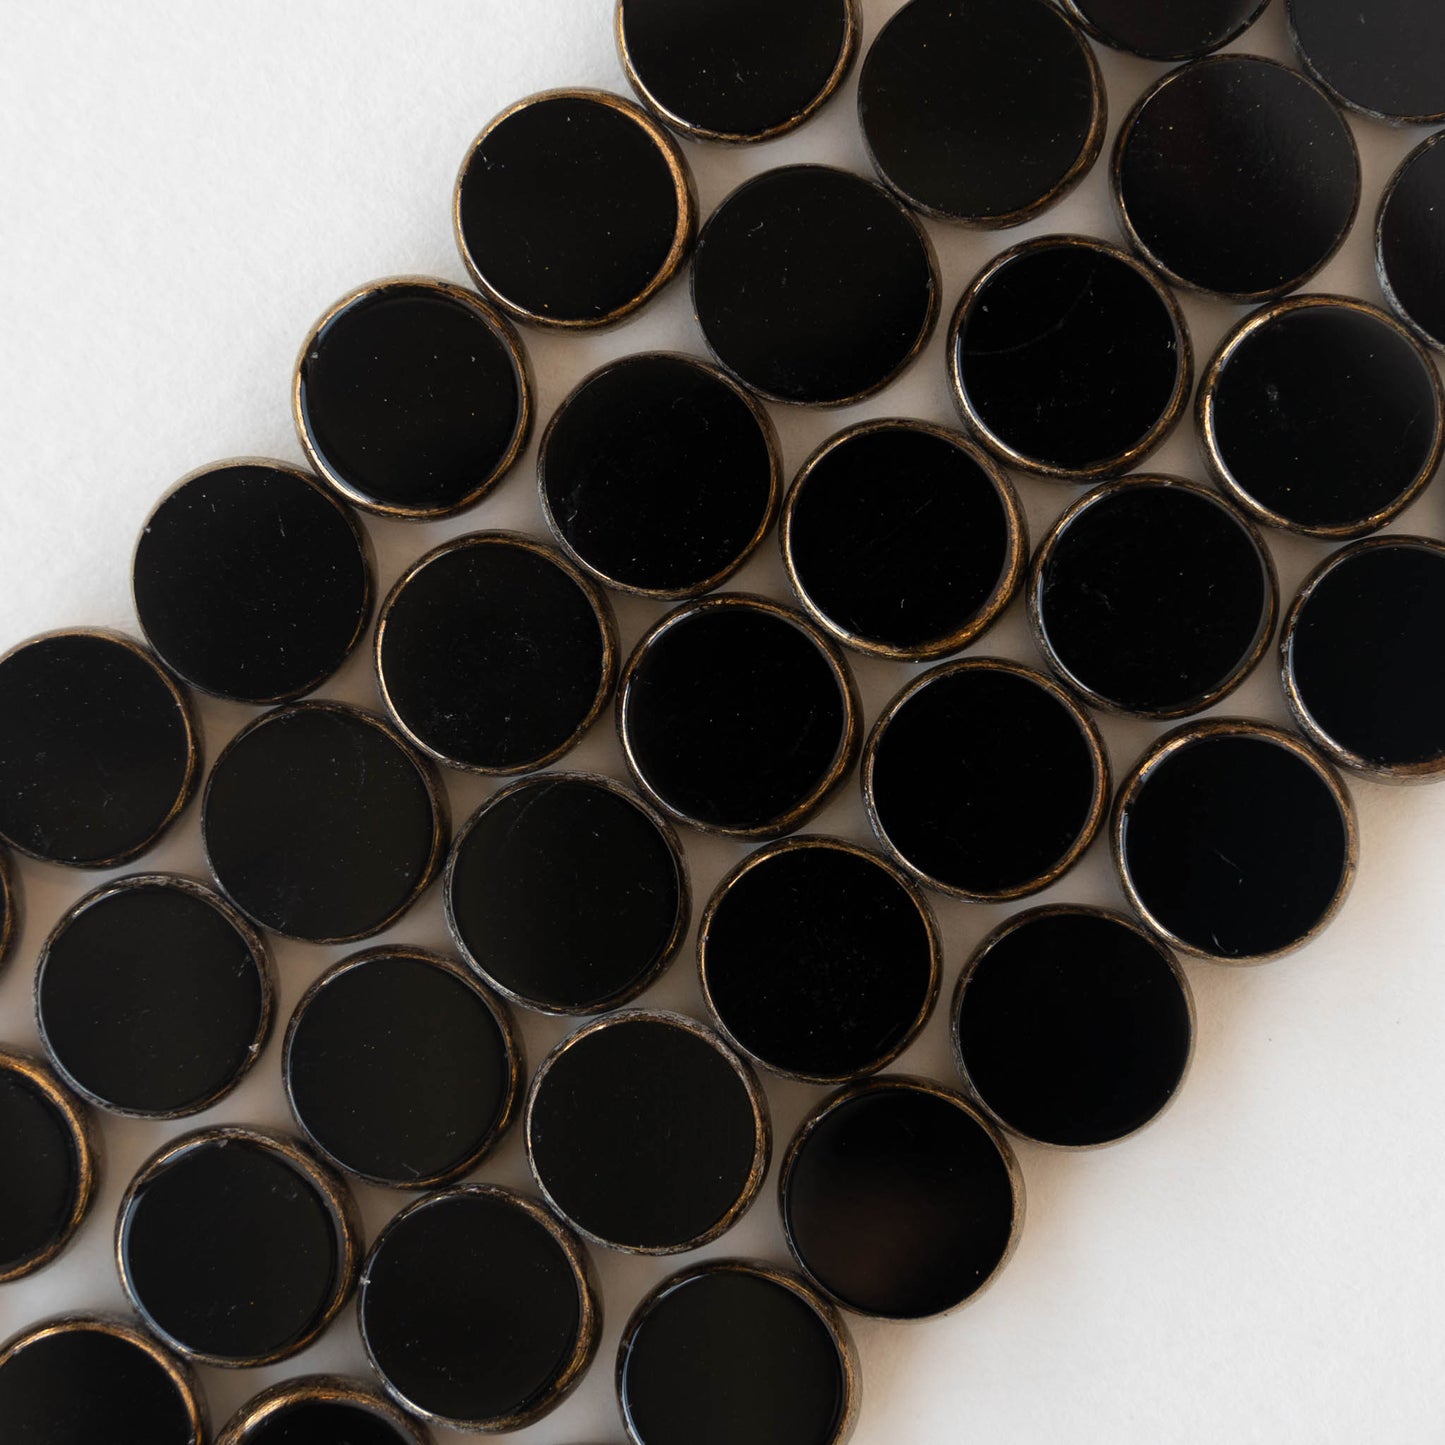 12mm Coin Beads - Opaque Black with Bronze - 10 beads